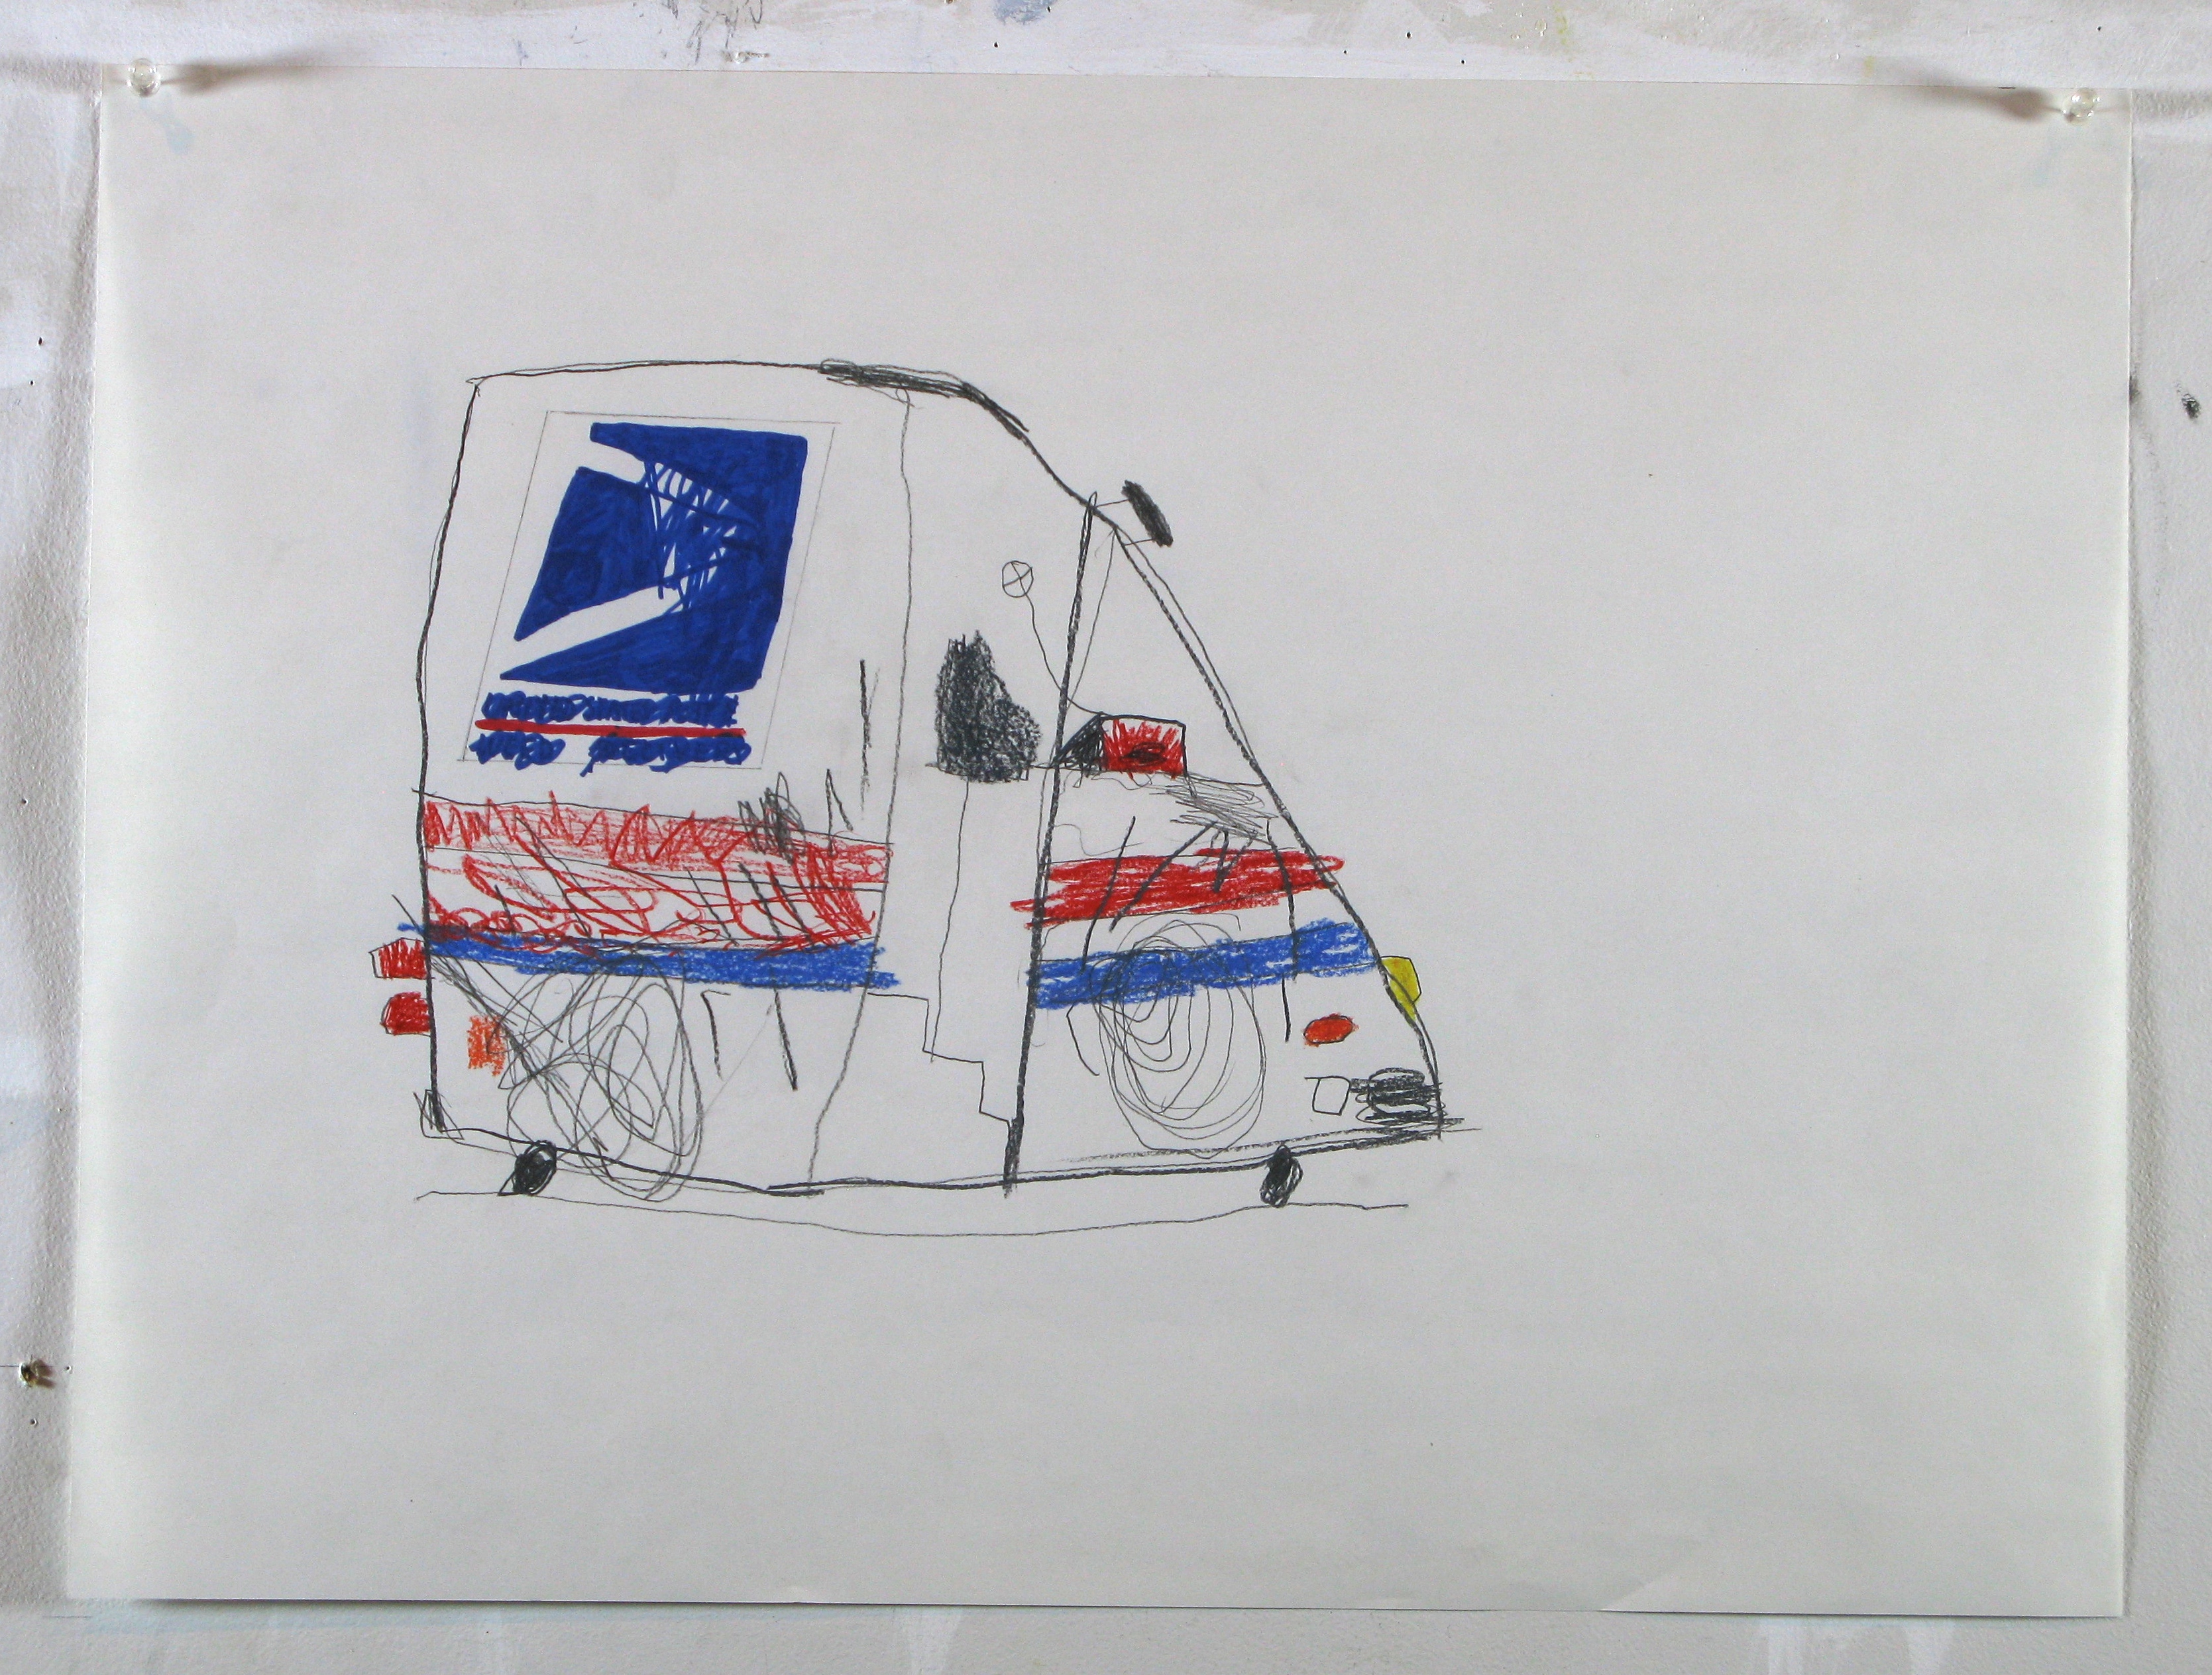 Robert_Nava-16_Mail_Truck_1_2015_Crayon_marker_pencil_and_color_pencil_on_canvas